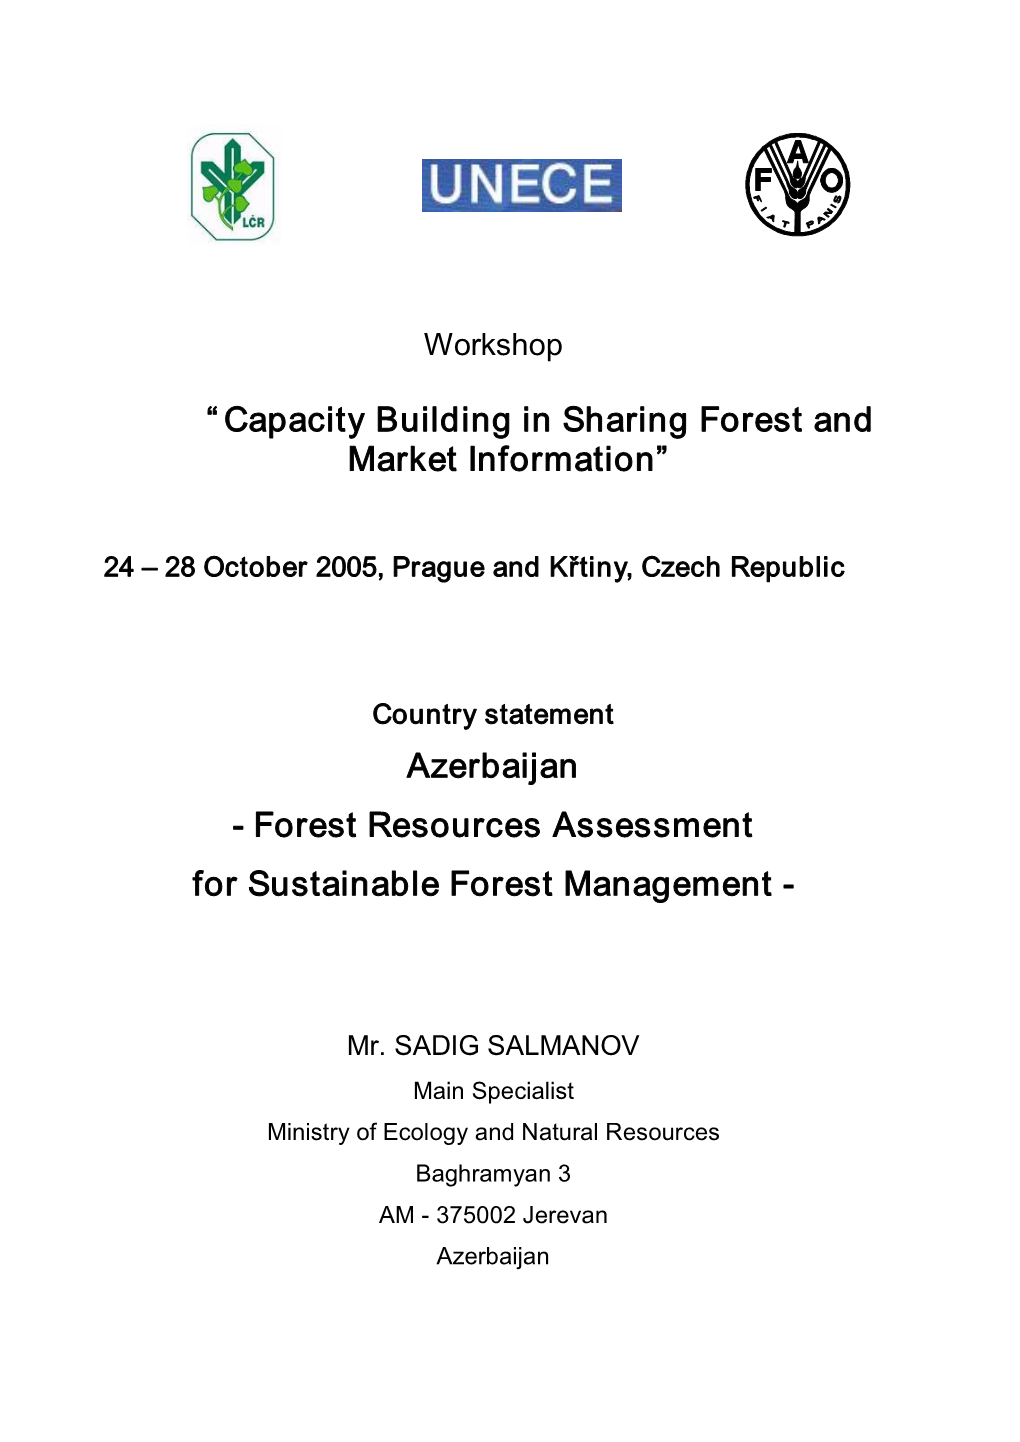 Capacity Building in Sharing Forest and Market Information”